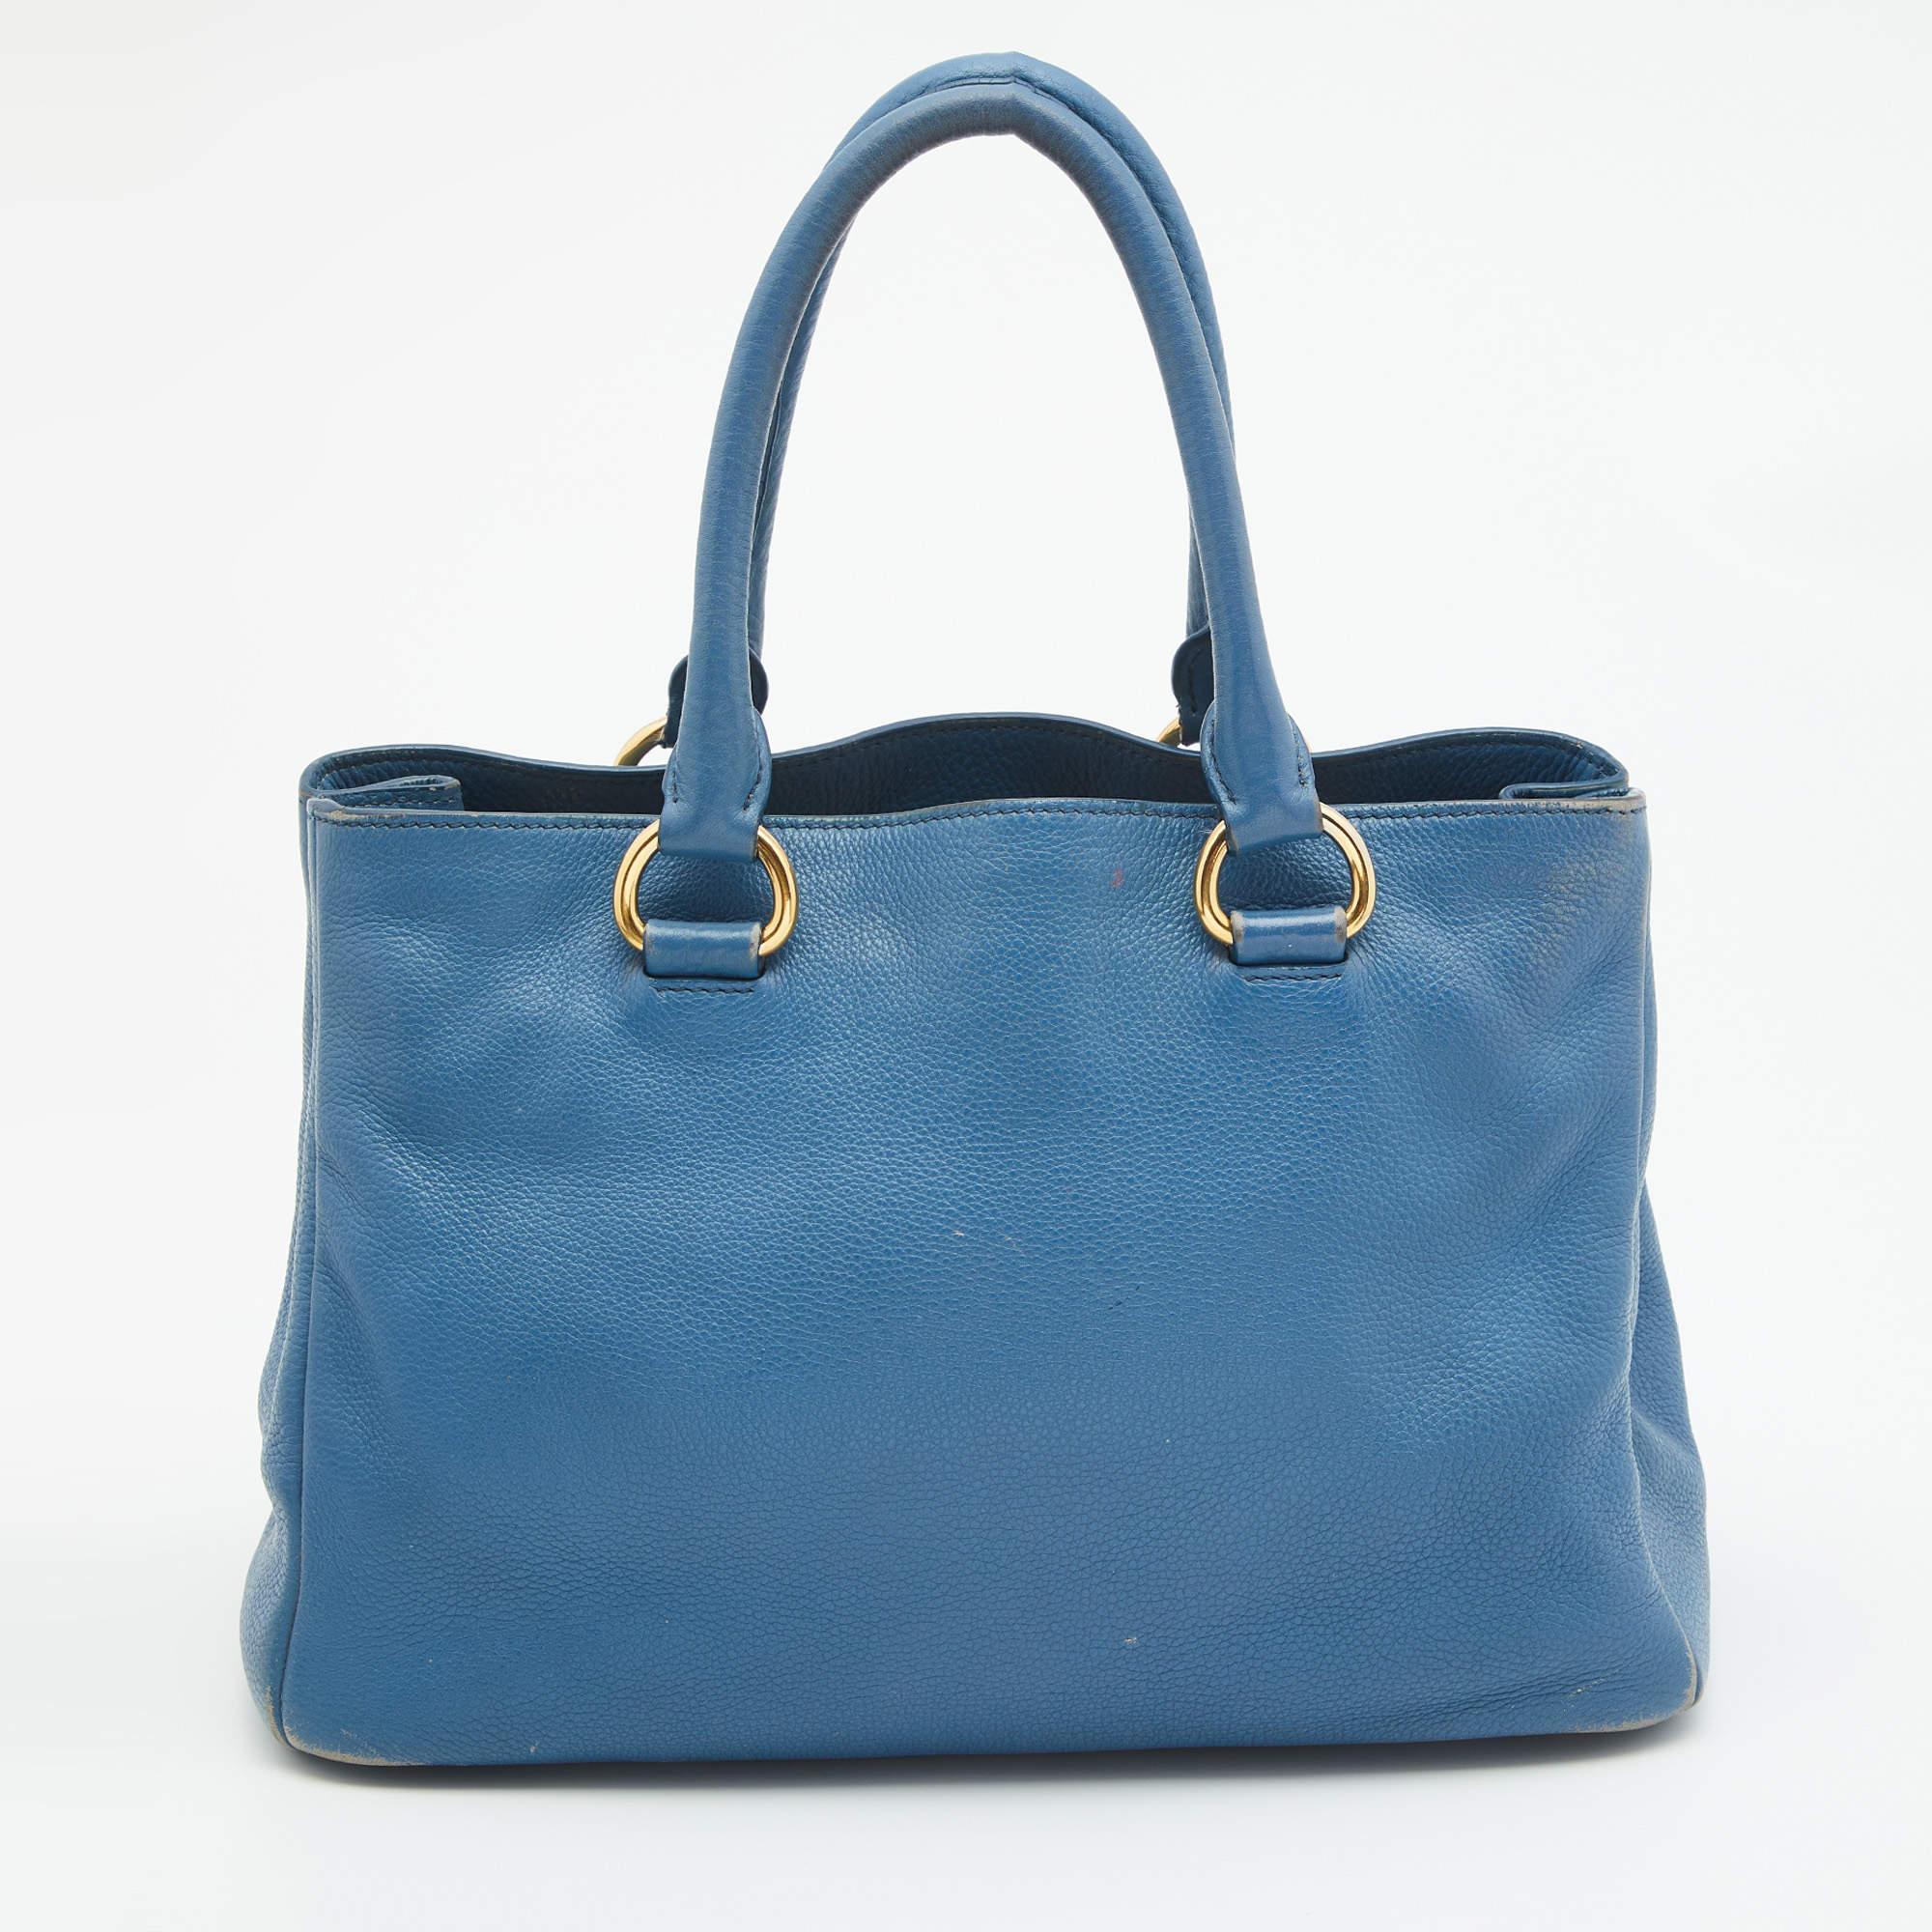 This tote is a result of blending high crafting skills with a practical design. It arrives with a durable exterior complemented by luxe detailing. It is an accessory that you can count on.

Includes: Detachable Strap